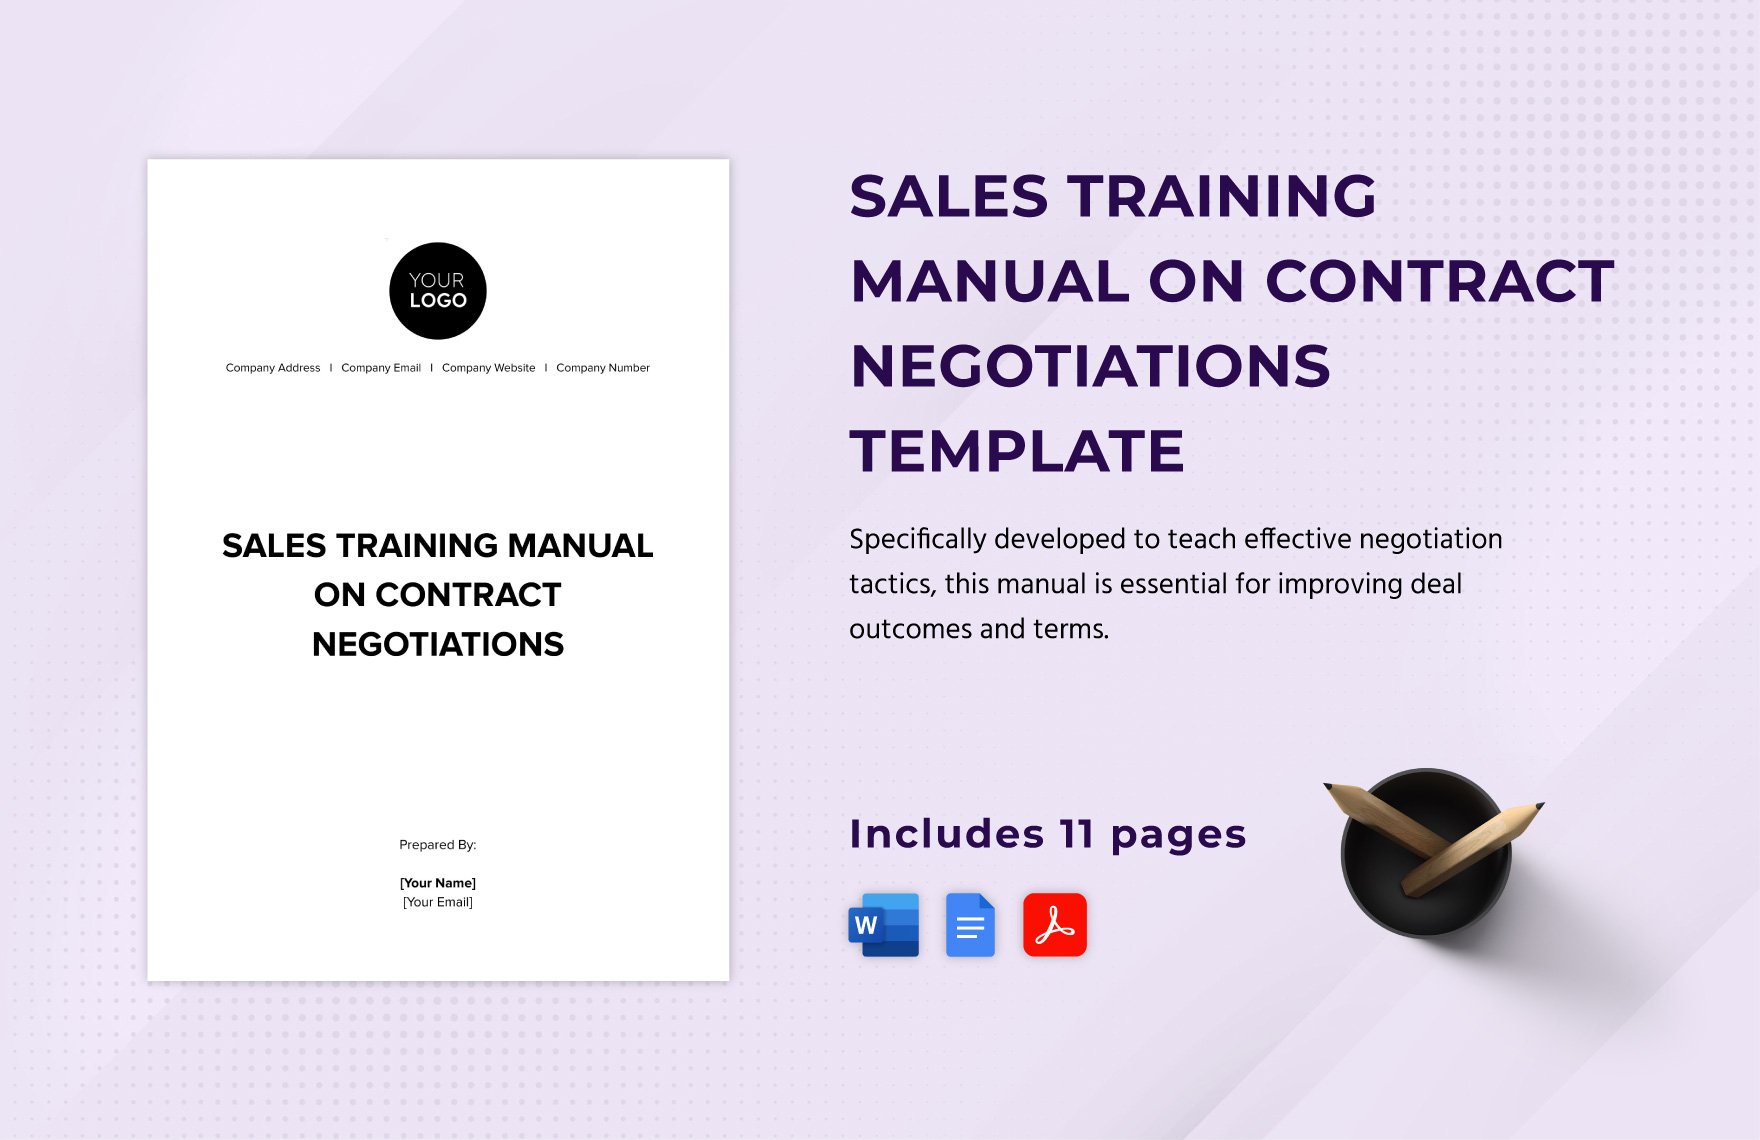 Sales Training Manual on Contract Negotiations Template